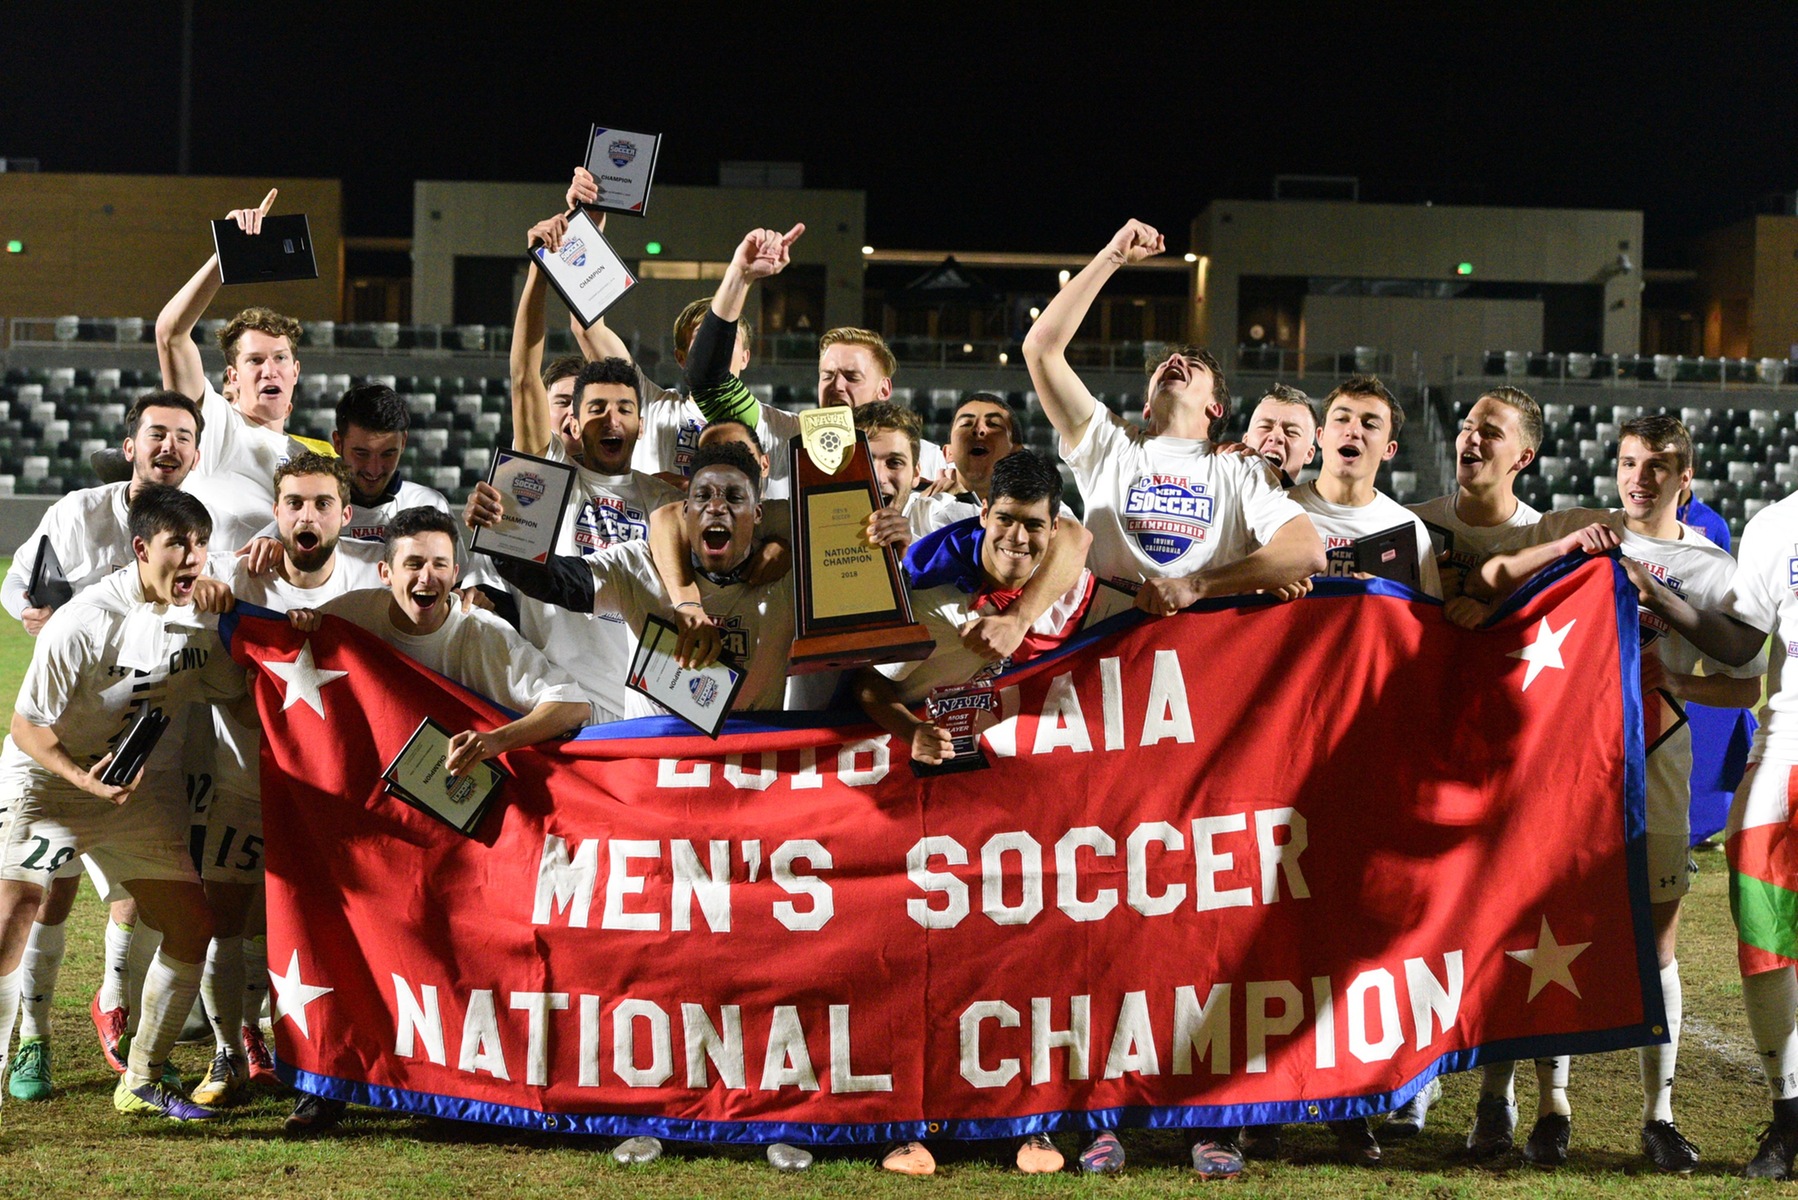 2019 NAIA Men's Soccer National Championship Qualifiers & Opening Round Schedule Announced